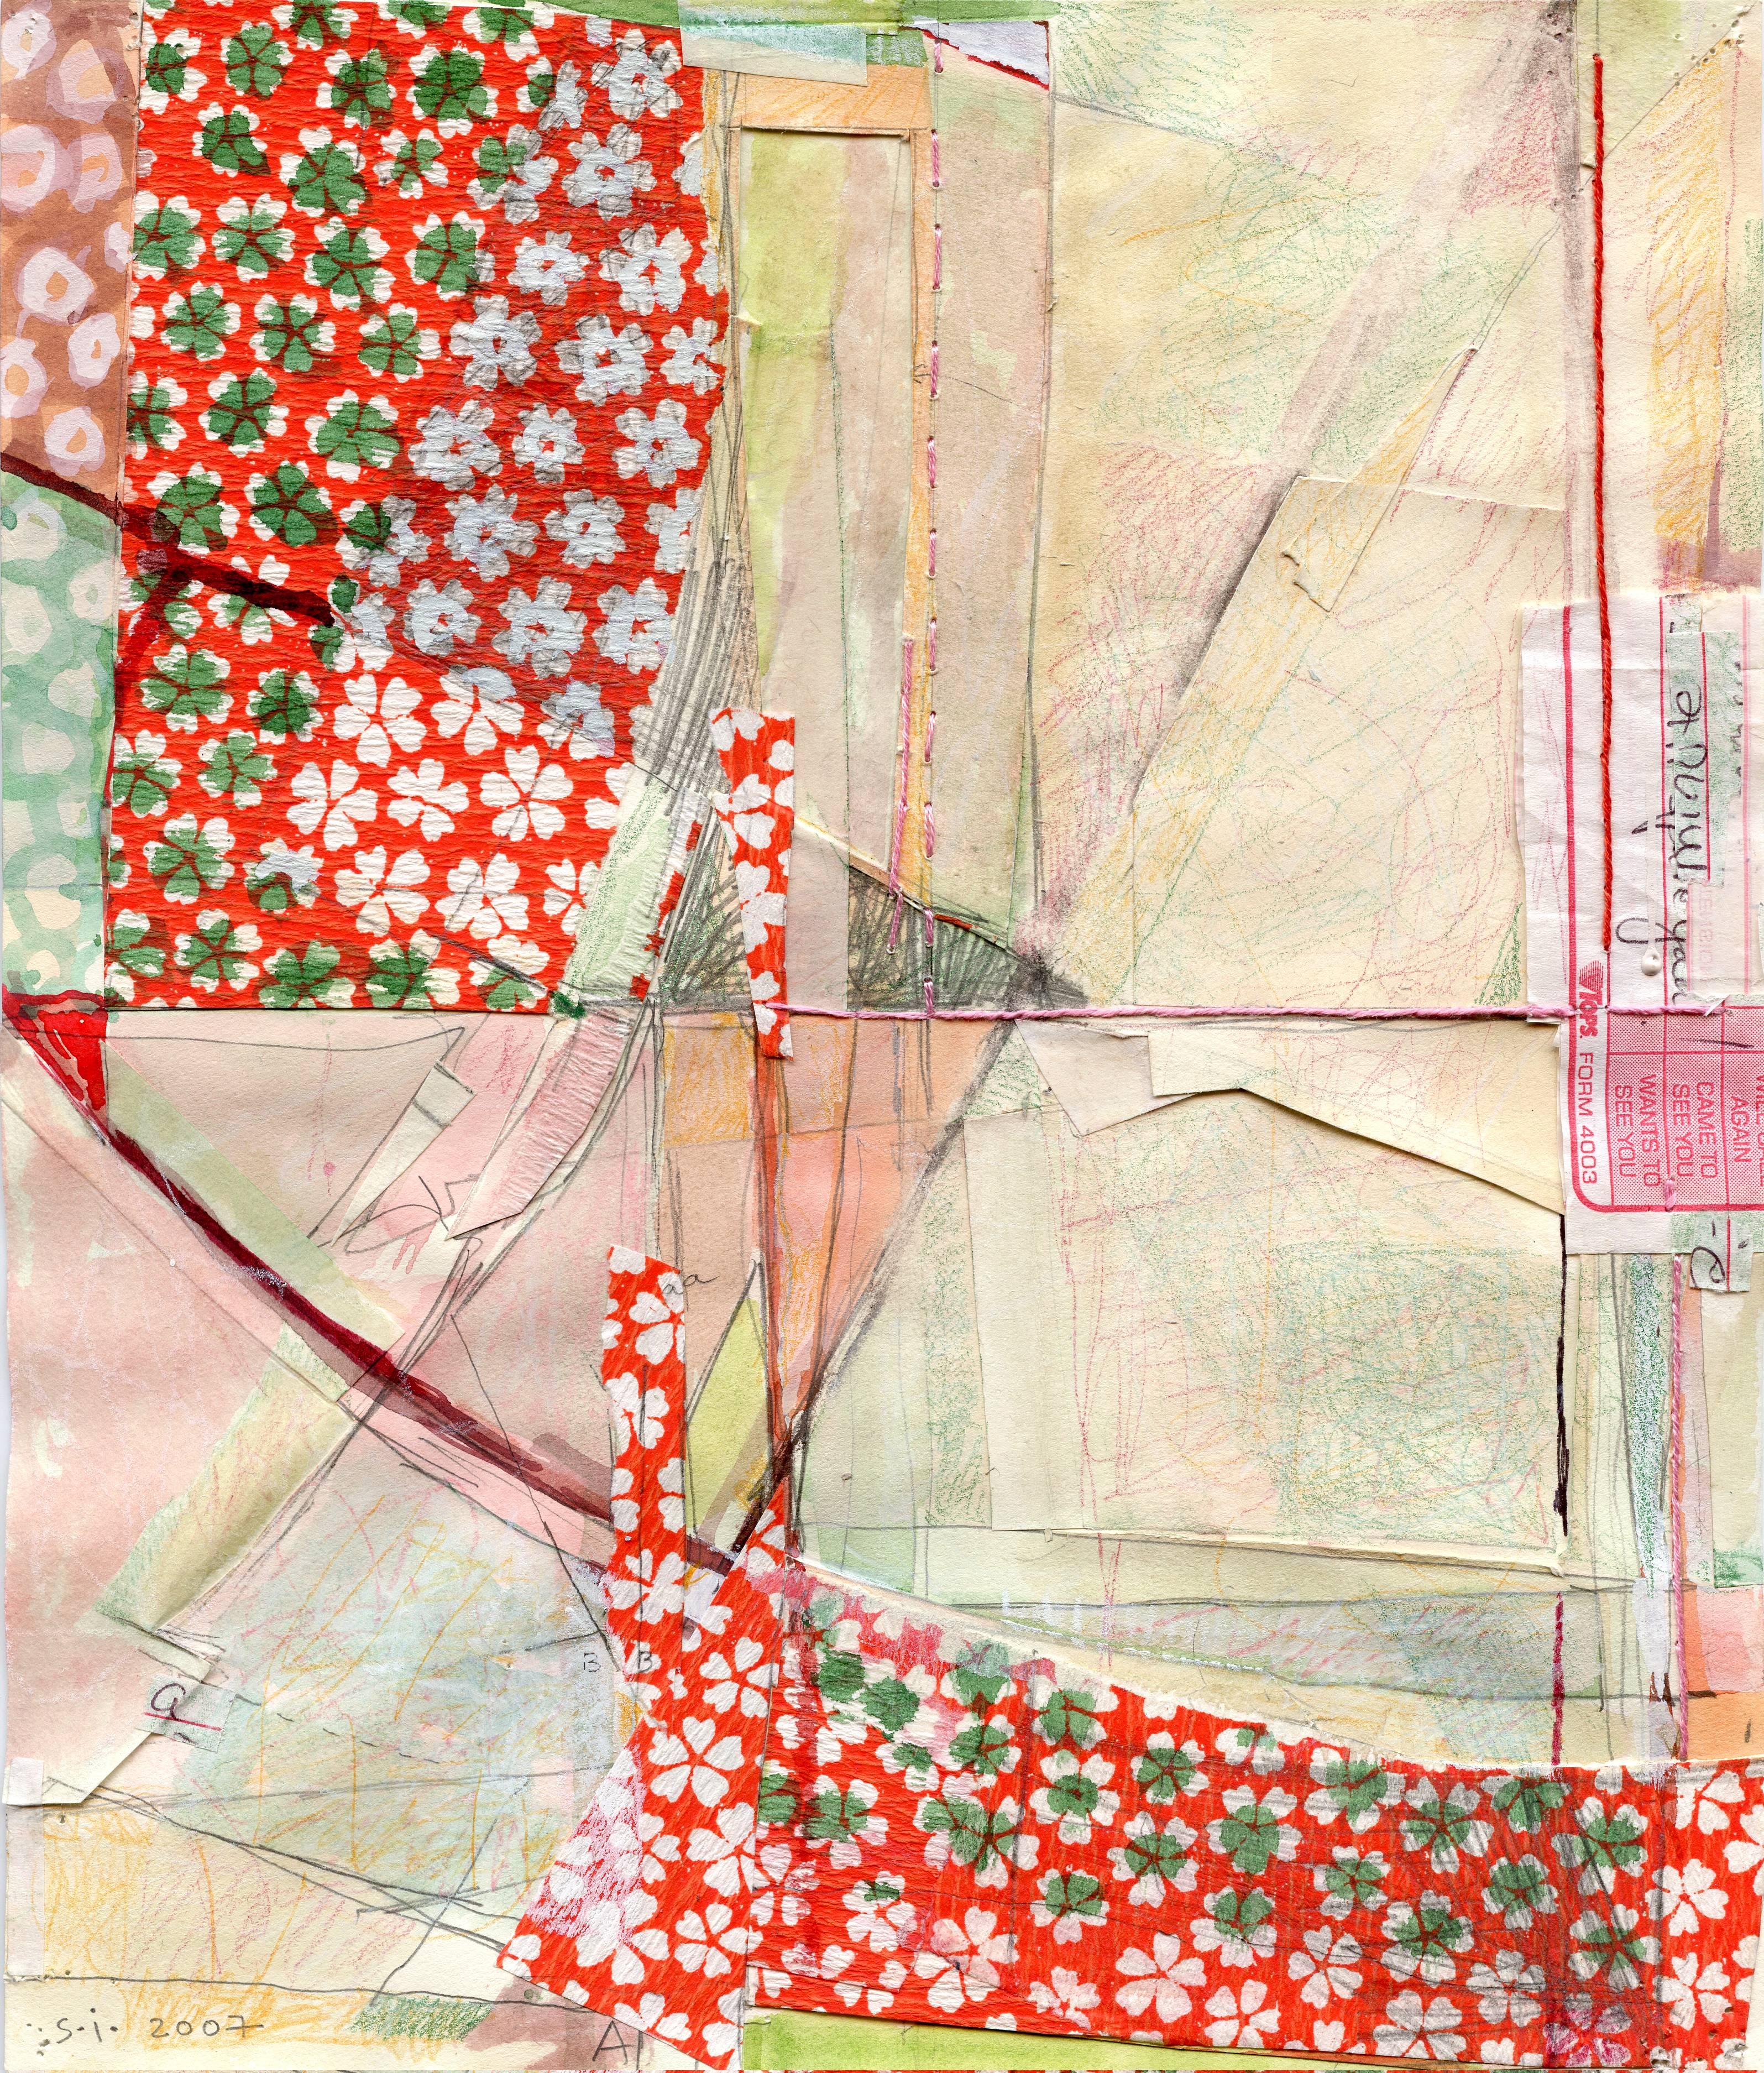 Sanda Iliescu Abstract Drawing - Kitchen Table Collages, Shoran's Scraps #6: Came to See You